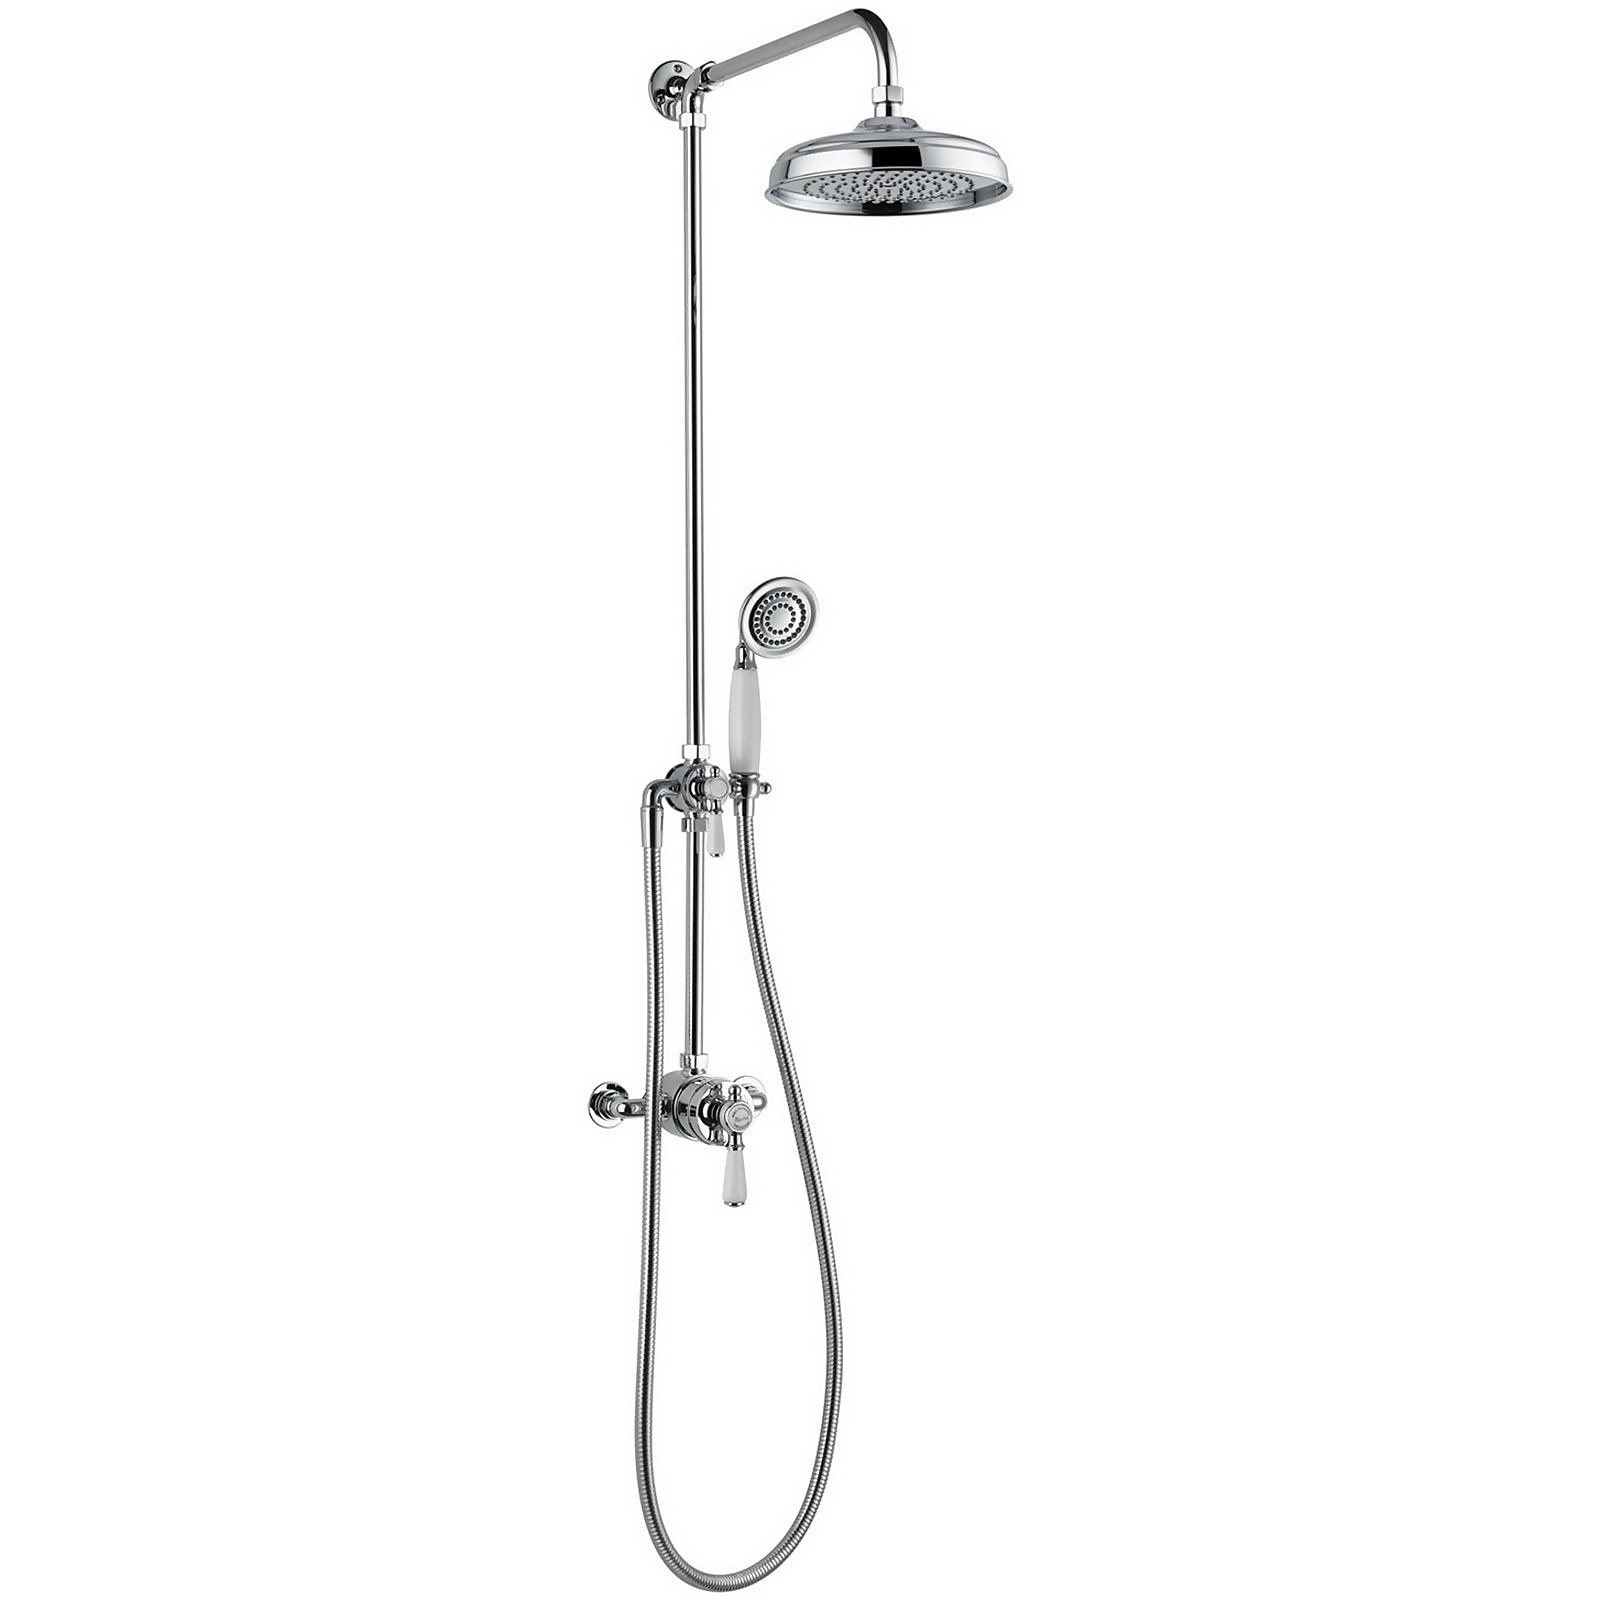 Photo of Mira Realm Traditional Mixer Shower